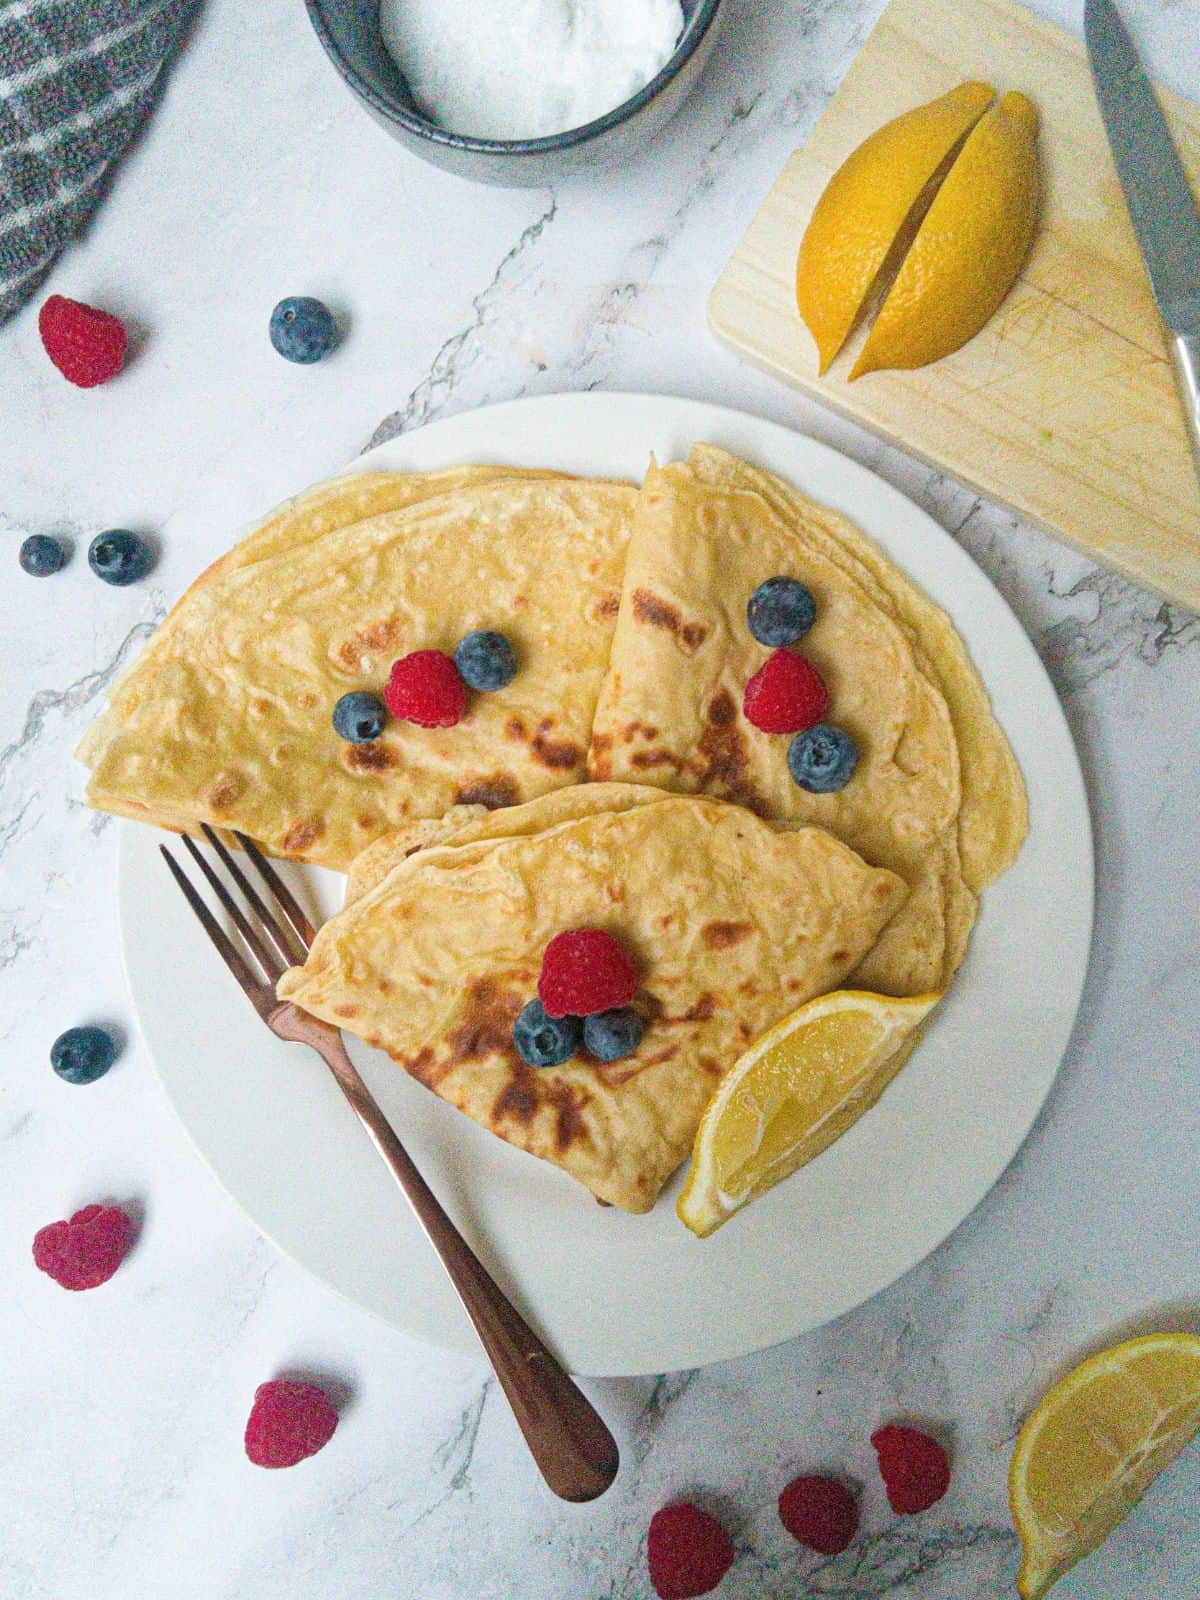 Three crepes on a white plate garnished with raspberries & blueberries. there is a fork on the plate and sliced lemon. In background there is a lemon on a chopping board and a bowl of sugar.